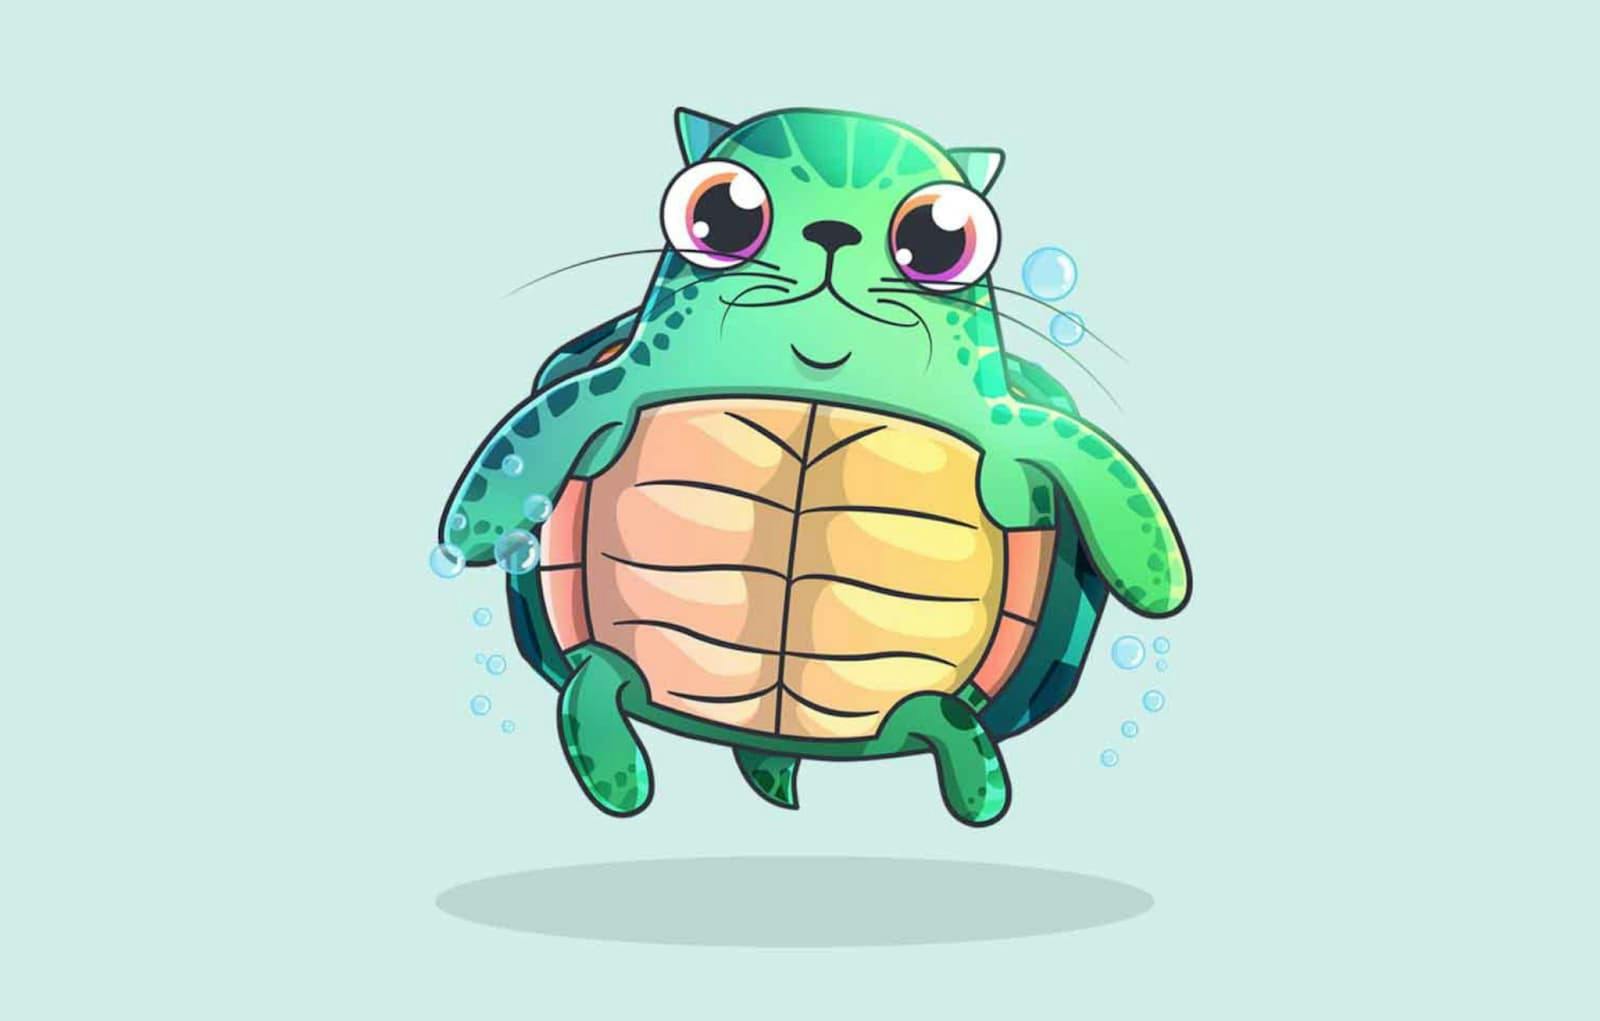 A limited edition CryptoKitty partnering with Operation Jairo to fund sea turtle conservation.